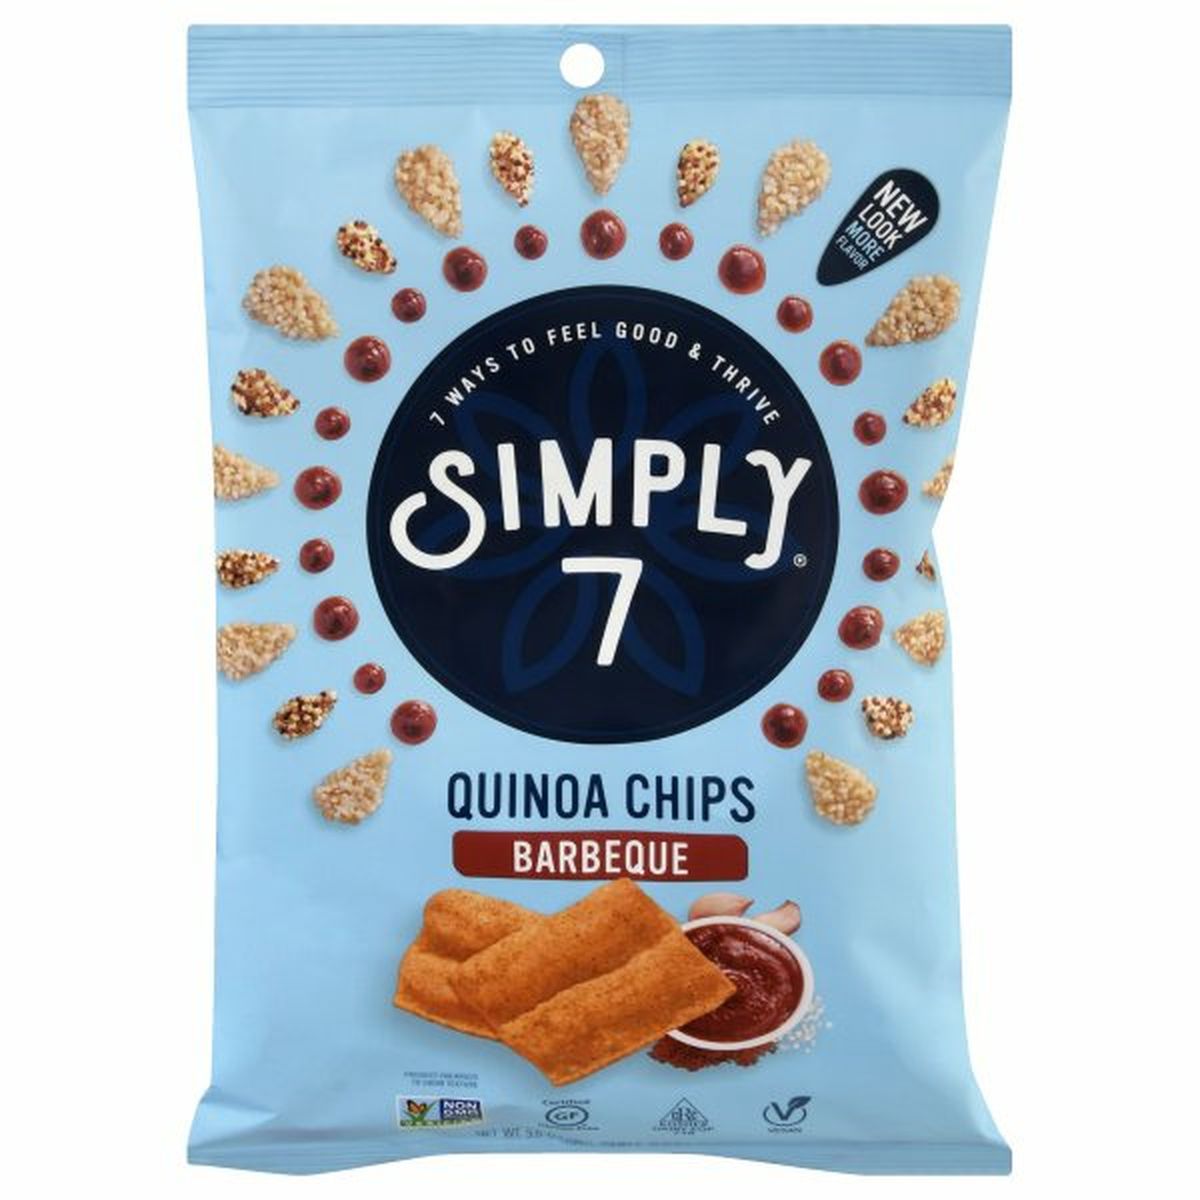 Calories in Simply7 Quinoa Chips, Barbeque